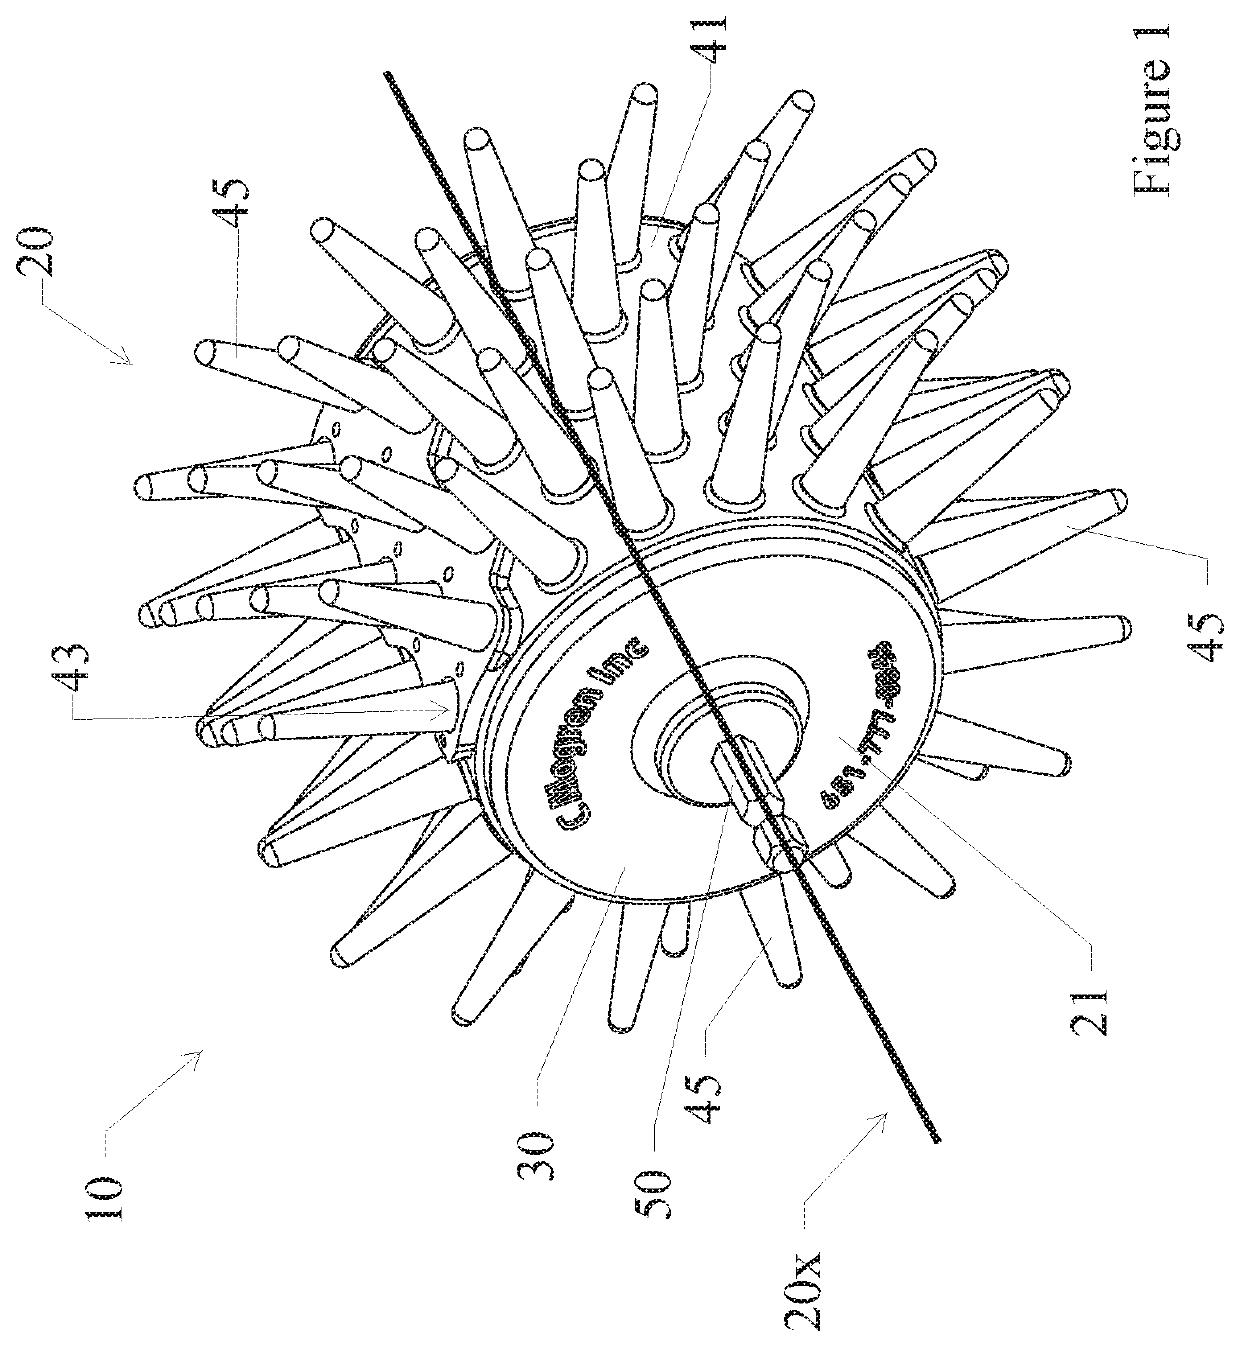 Pet grooming and skin care tool and methods of making and using the tool